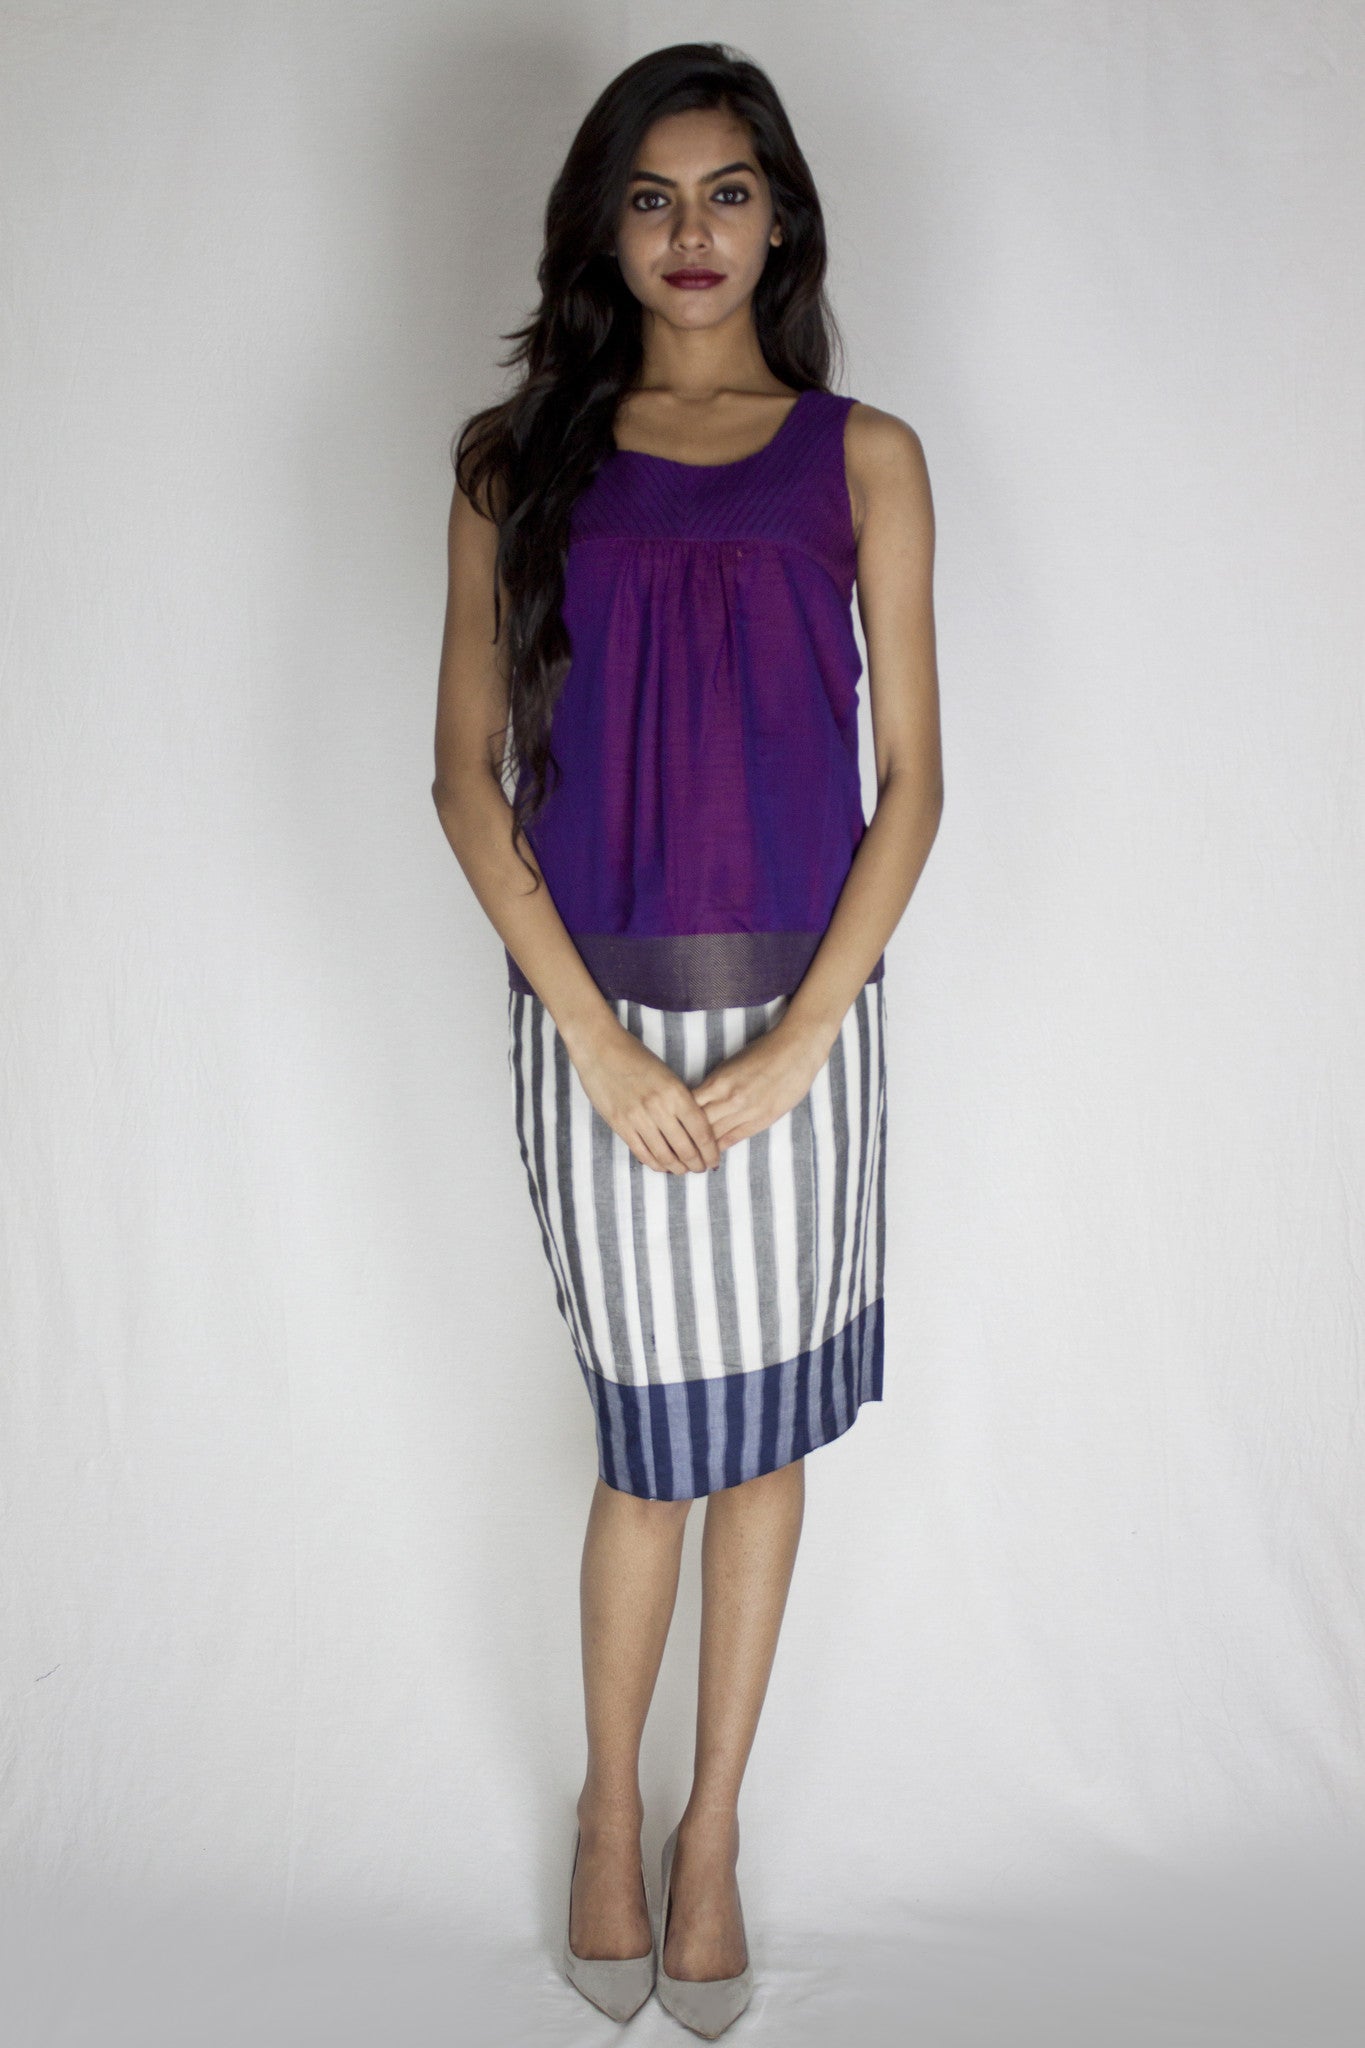 woman wearing purple top with striped skirt